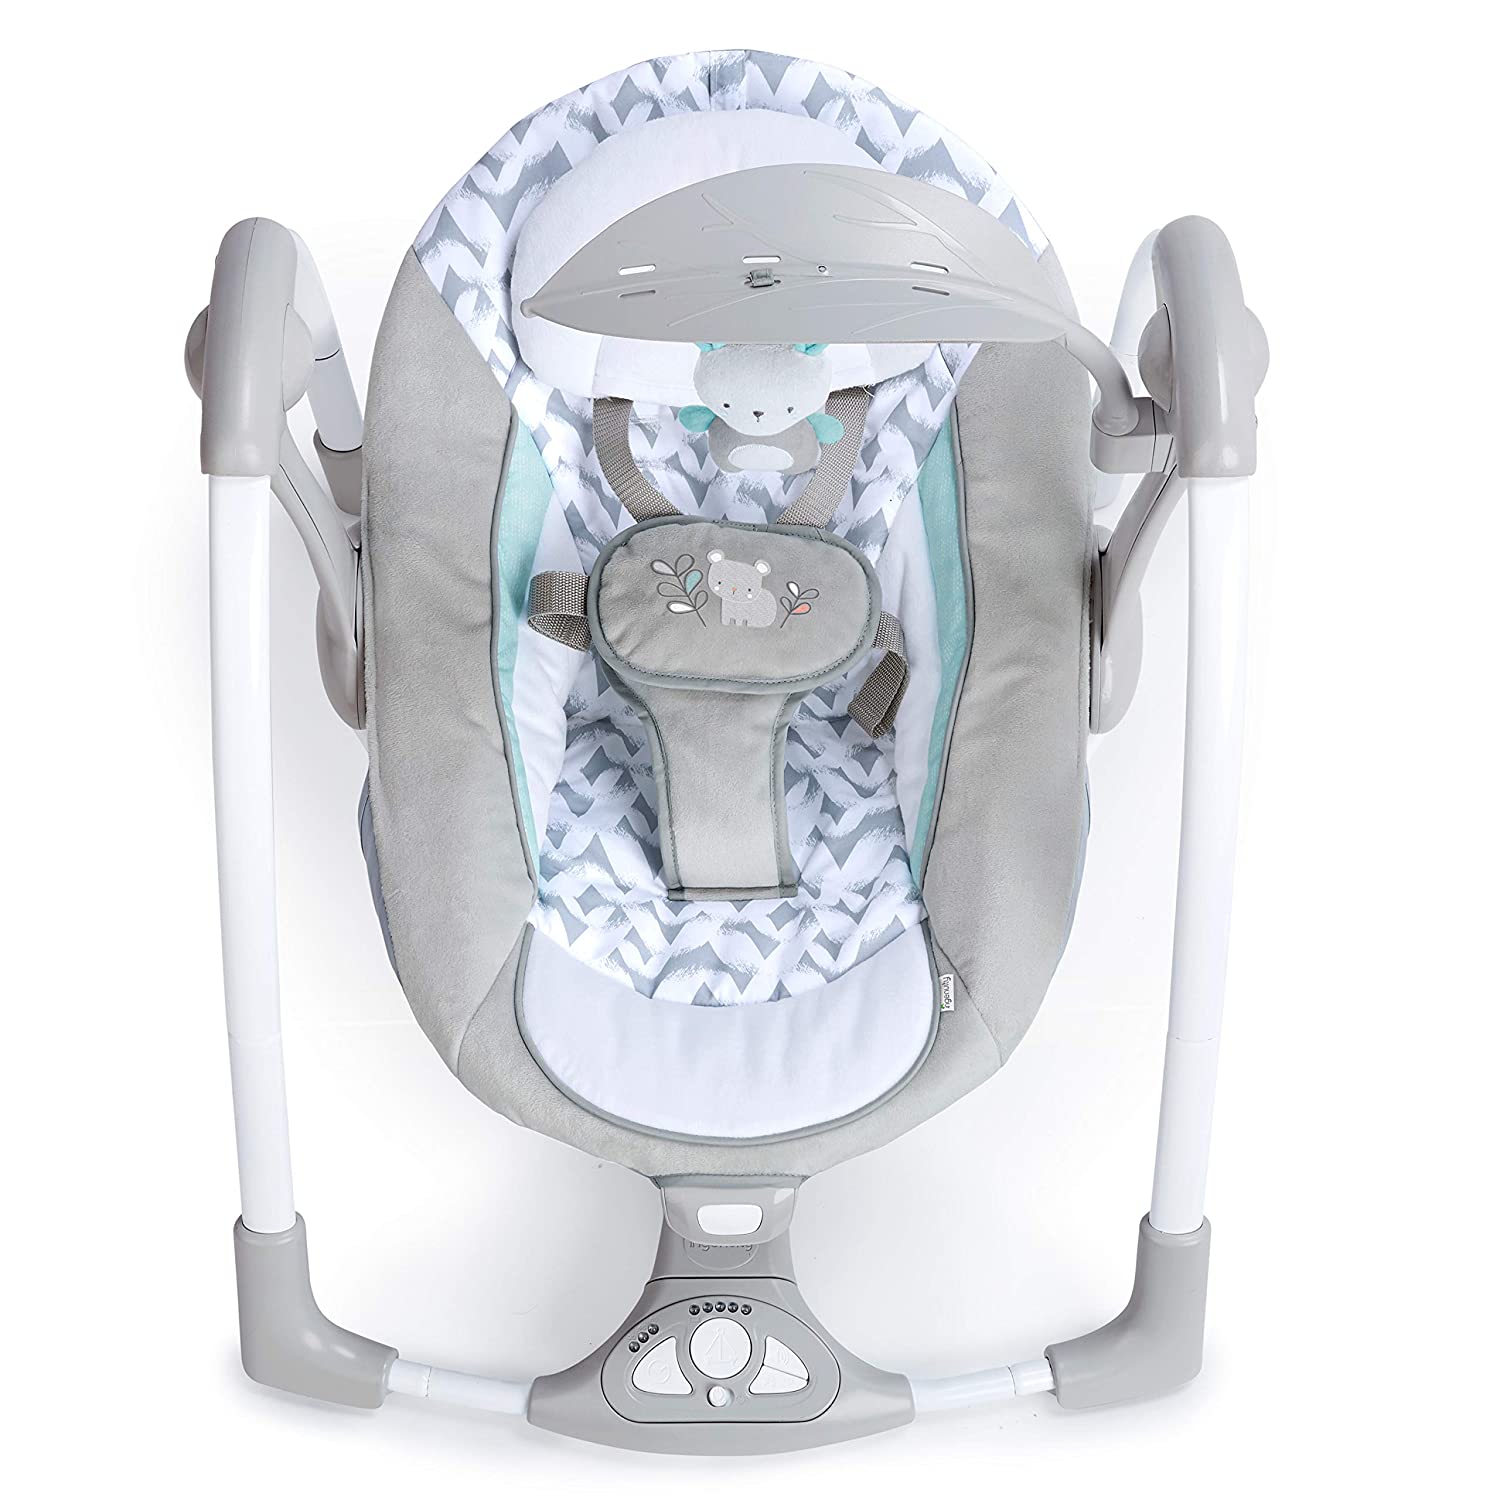 Portable Baby Swing Bouncer Child Rocker Vibrate Seat Automatic Compact Foldable-Baby Swings-AULEY